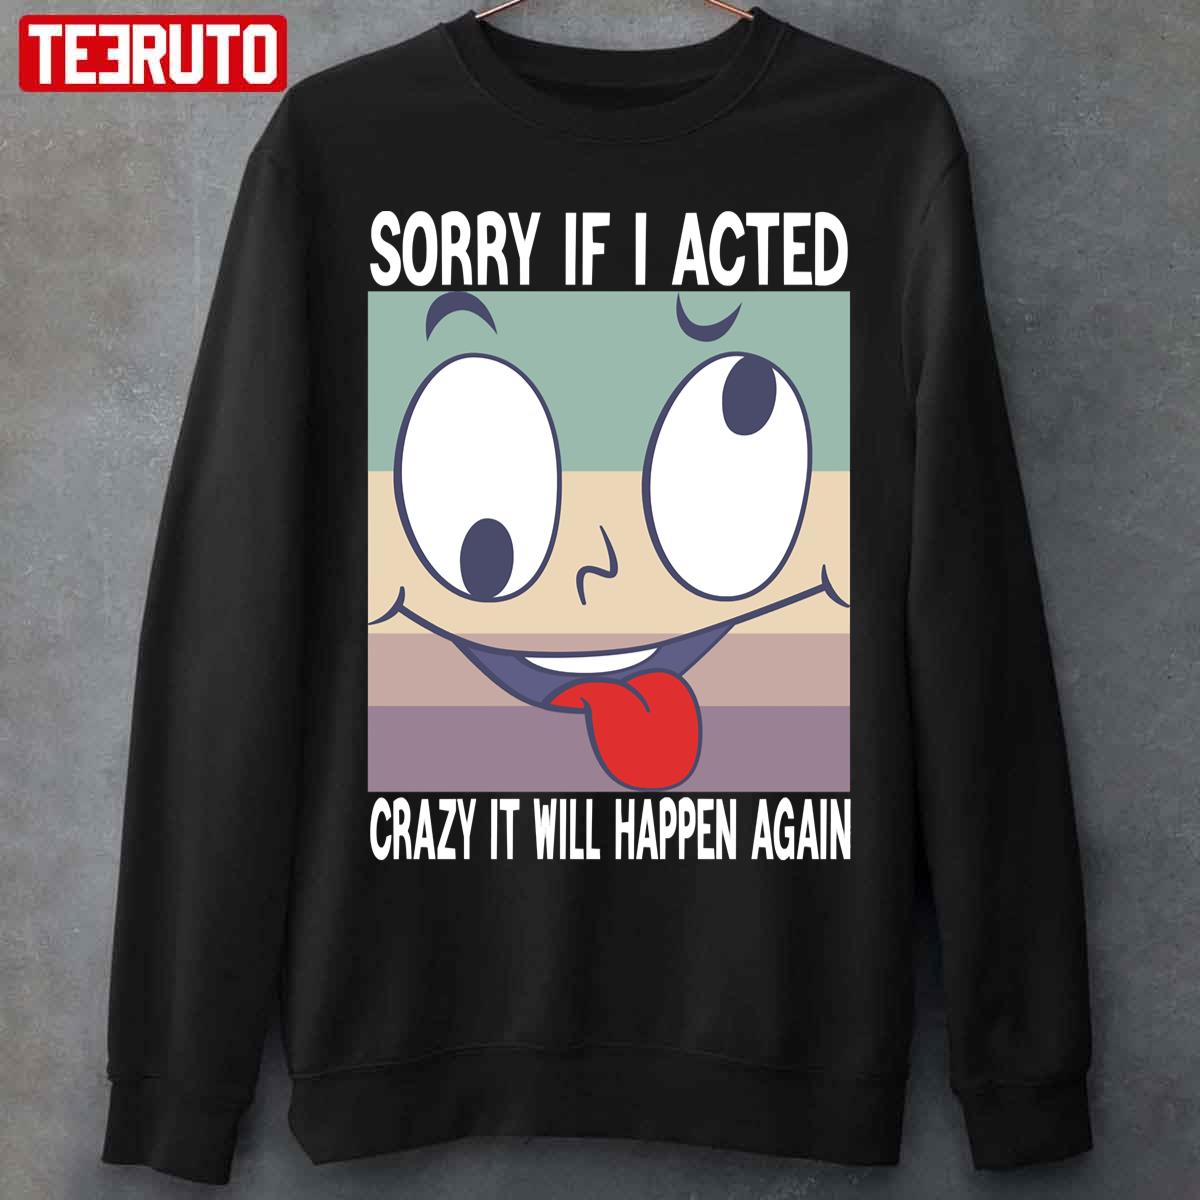 Sorry If I Acted Crazy Unisex T-Shirt